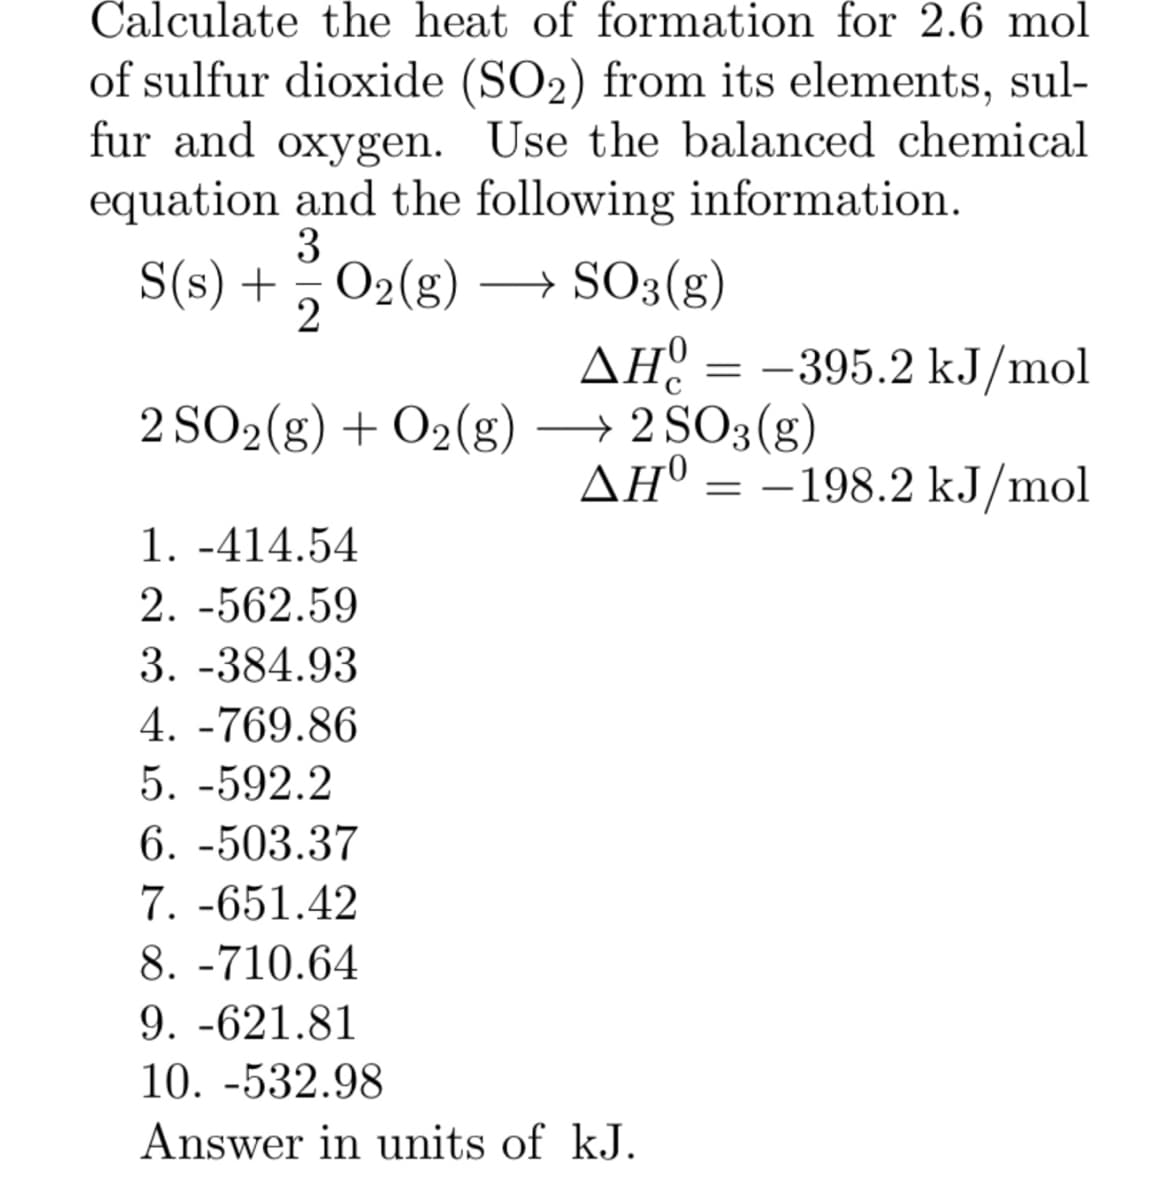 Calculate the heat of formation for 2.6 mol
of sulfur dioxide (SO2) from its elements, sul-
fur and oxygen. Use the balanced chemical
equation and the following information.
3
S(s) + = O₂(g) → SO3(g)
2
AH = -395.2 kJ/mol
2 SO2(g) + O2(g) → 2 SO3(g)
ΔΗ
AHO = -198.2 kJ/mol
1. -414.54
2. -562.59
3. -384.93
4.-769.86
5. -592.2
6. -503.37
7. -651.42
8. -710.64
9. -621.81
10. -532.98
Answer in units of kJ.